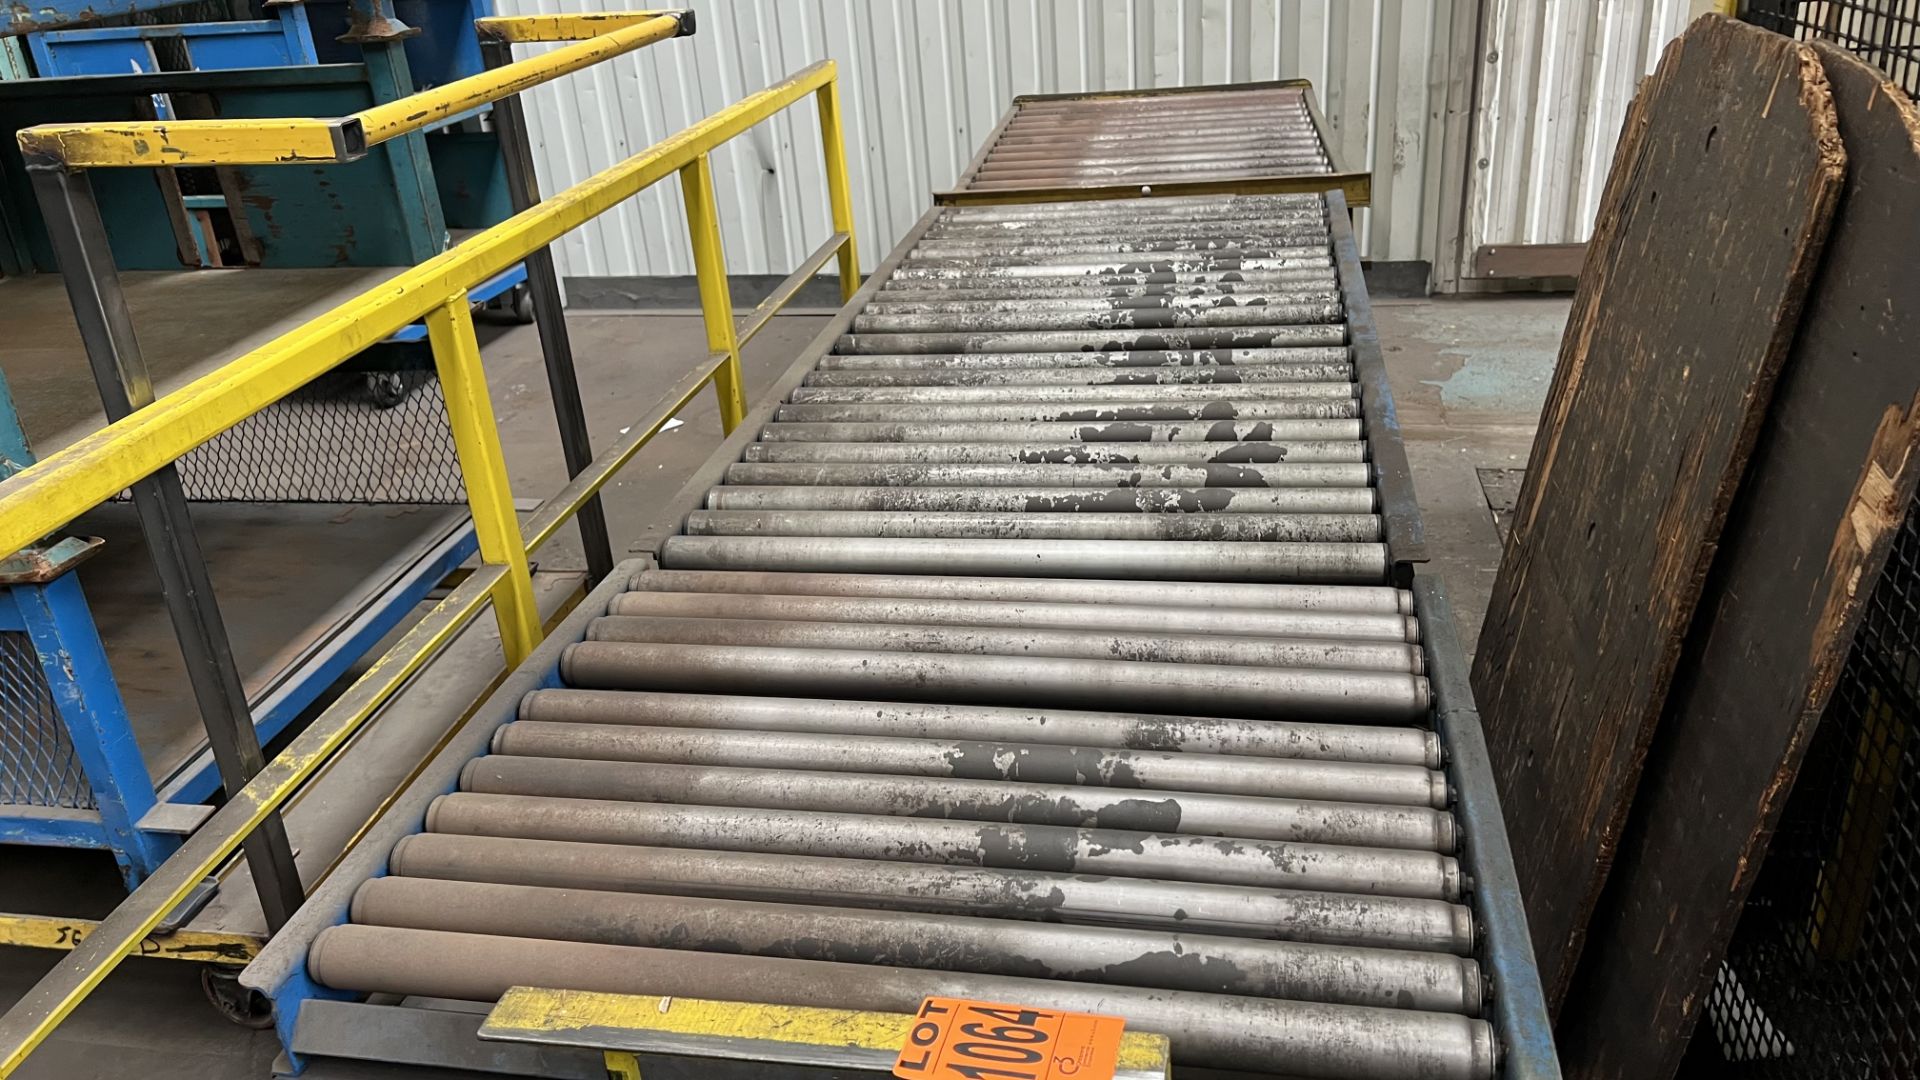 Lot of manual roller conveyors incl. (1) 2-level unit w/ rail wheels and casters and (3) sections of - Image 3 of 3